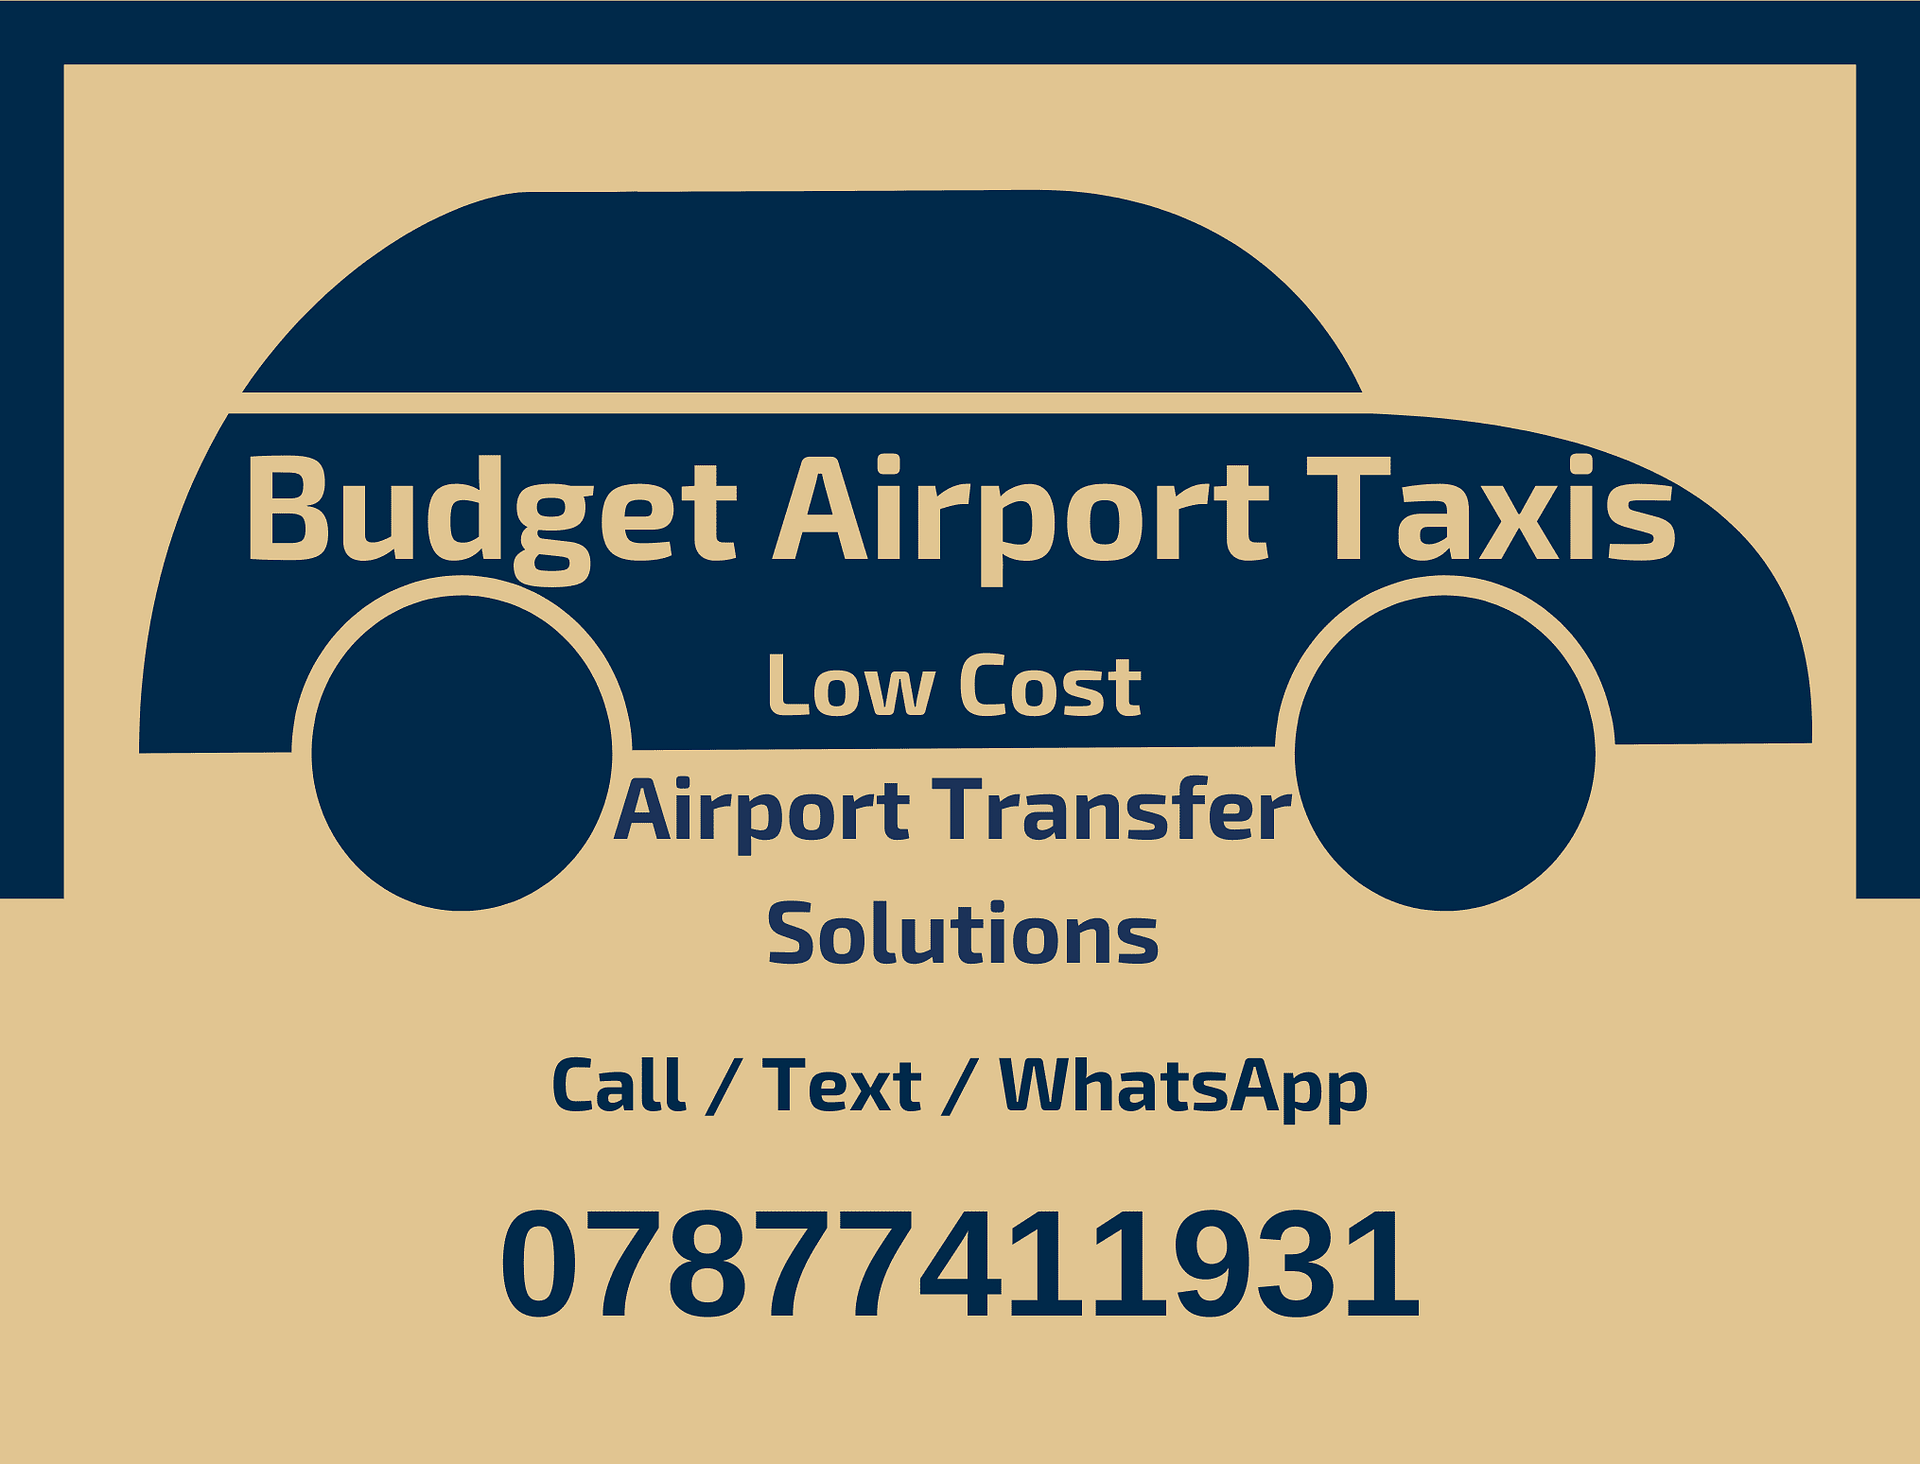 budget airport taxis call banner